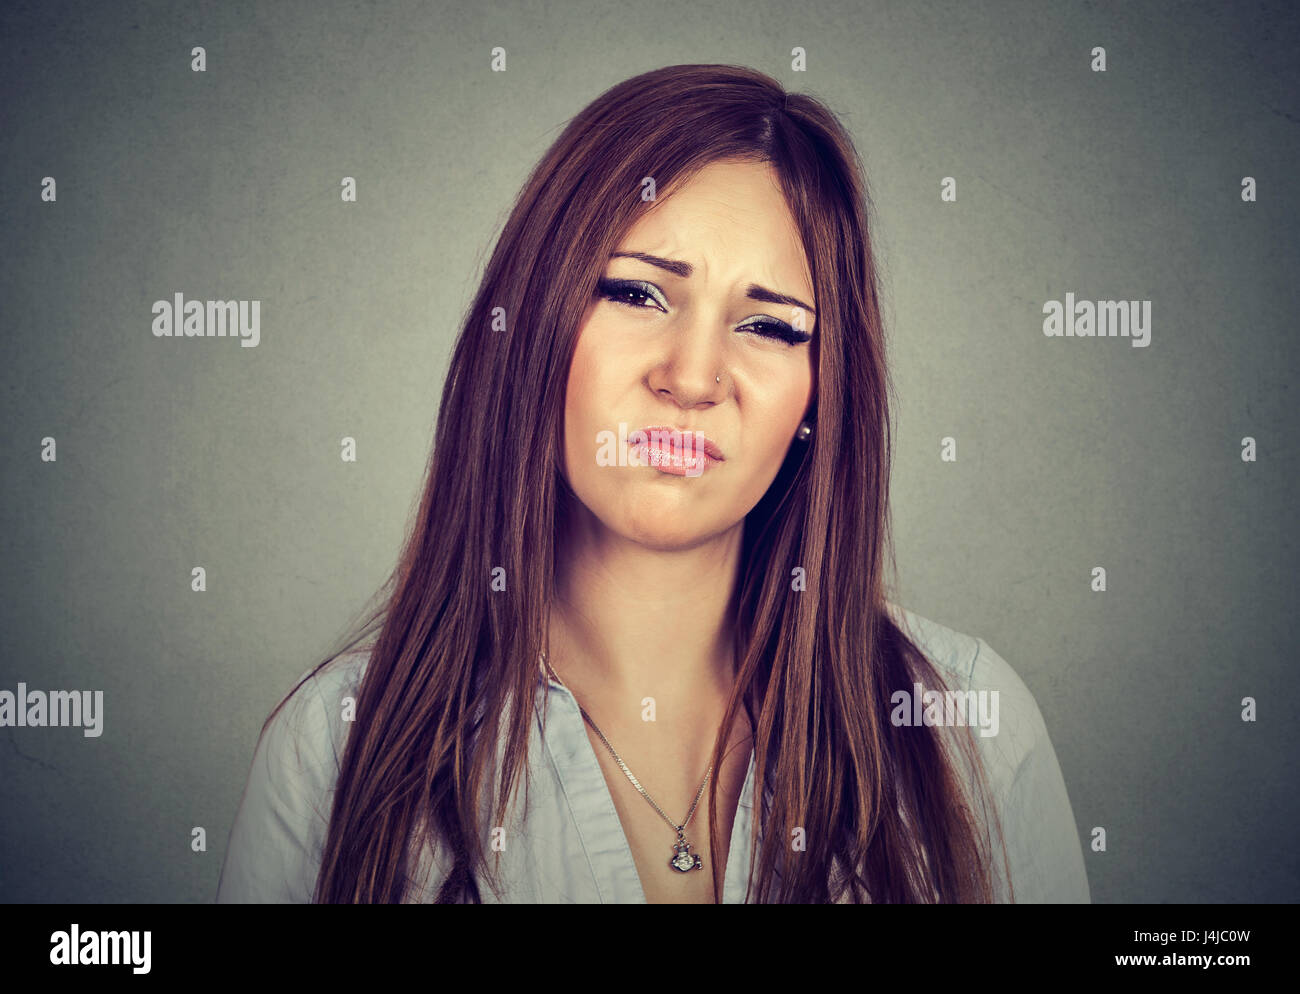 Disgusted woman isolated on gray background Stock Photo